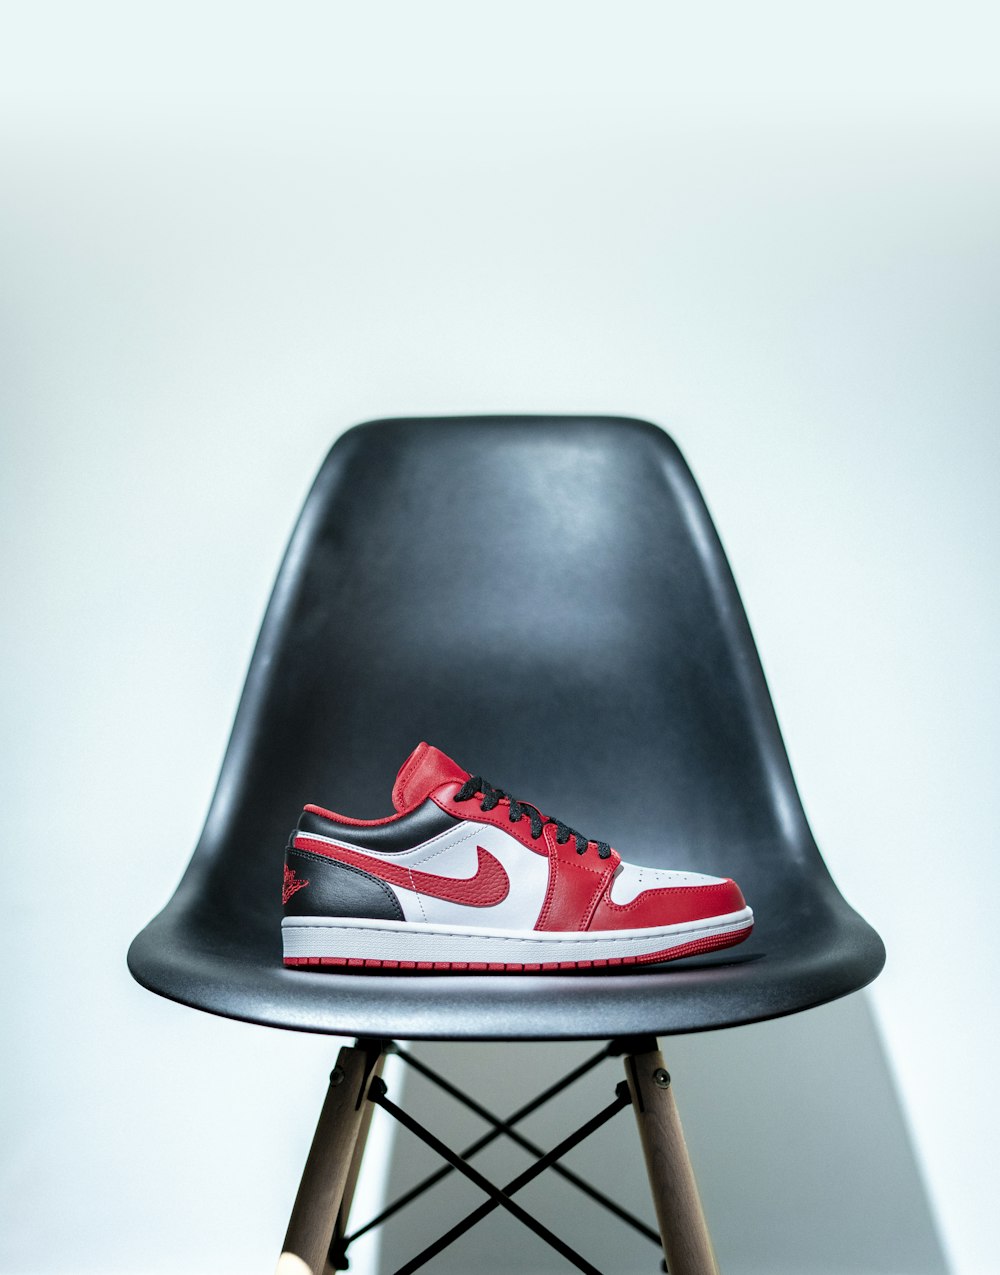 a black and red shoe on a black chair